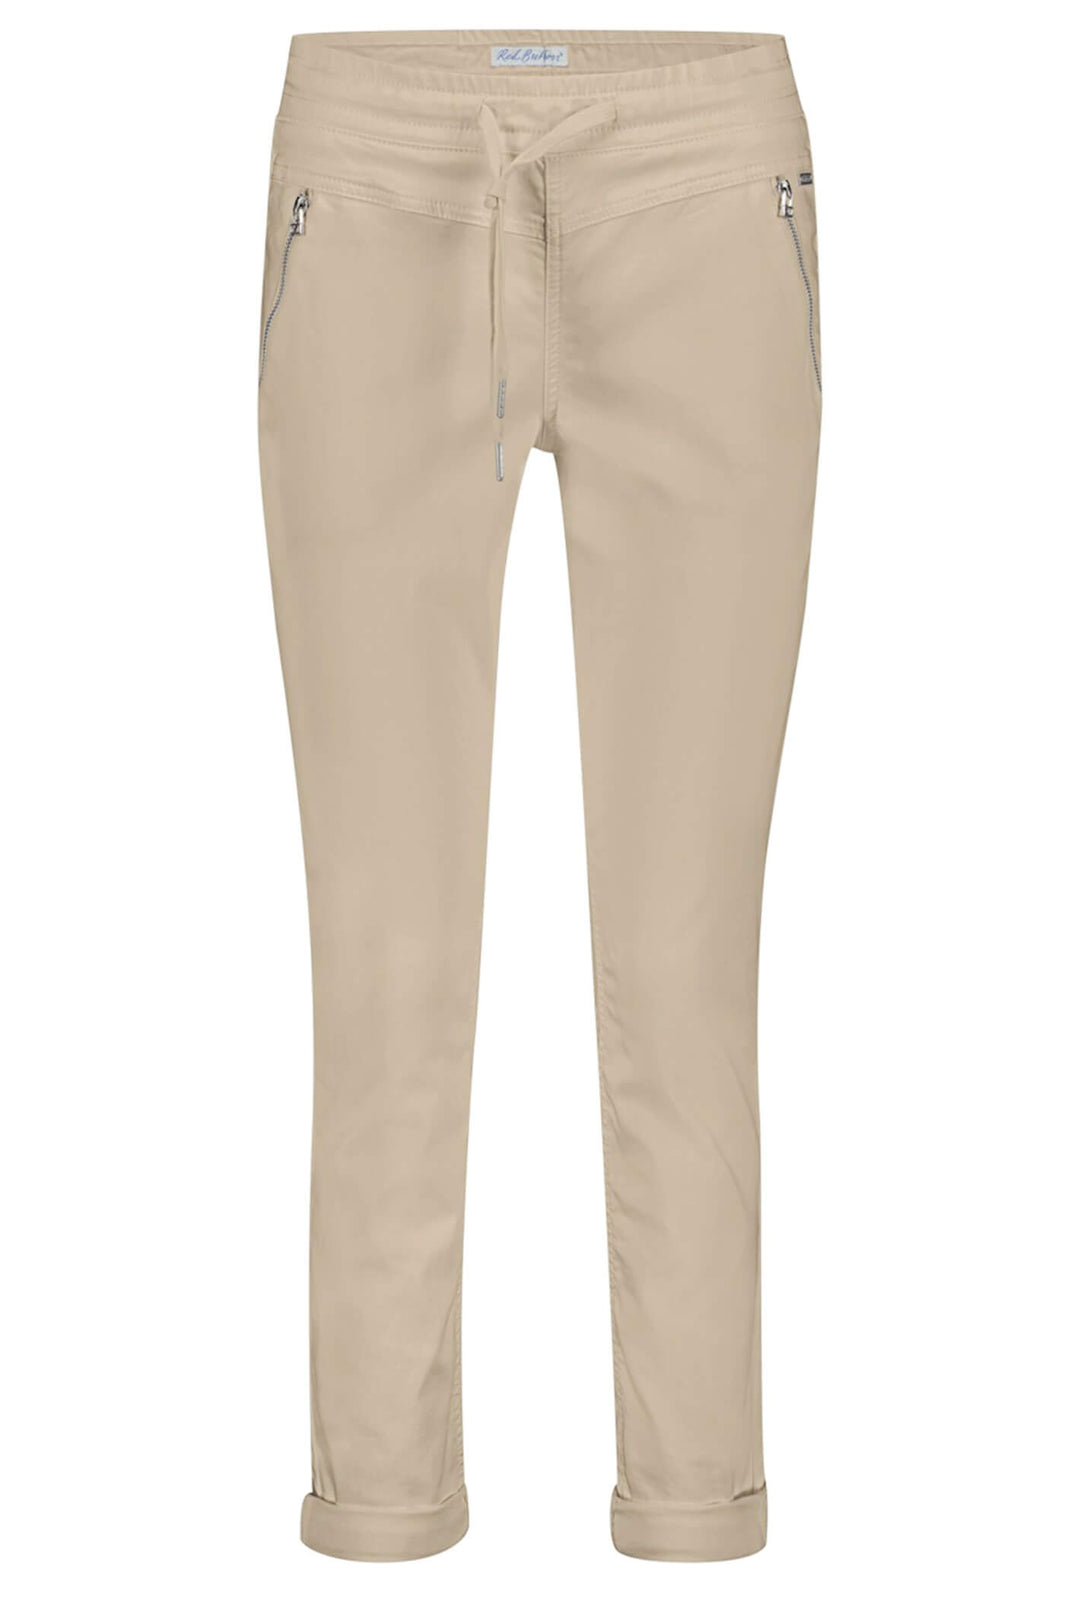 Red Button SRB3936 Sand Tessy Crop Jogger Trousers - Olivia Grace Fashion